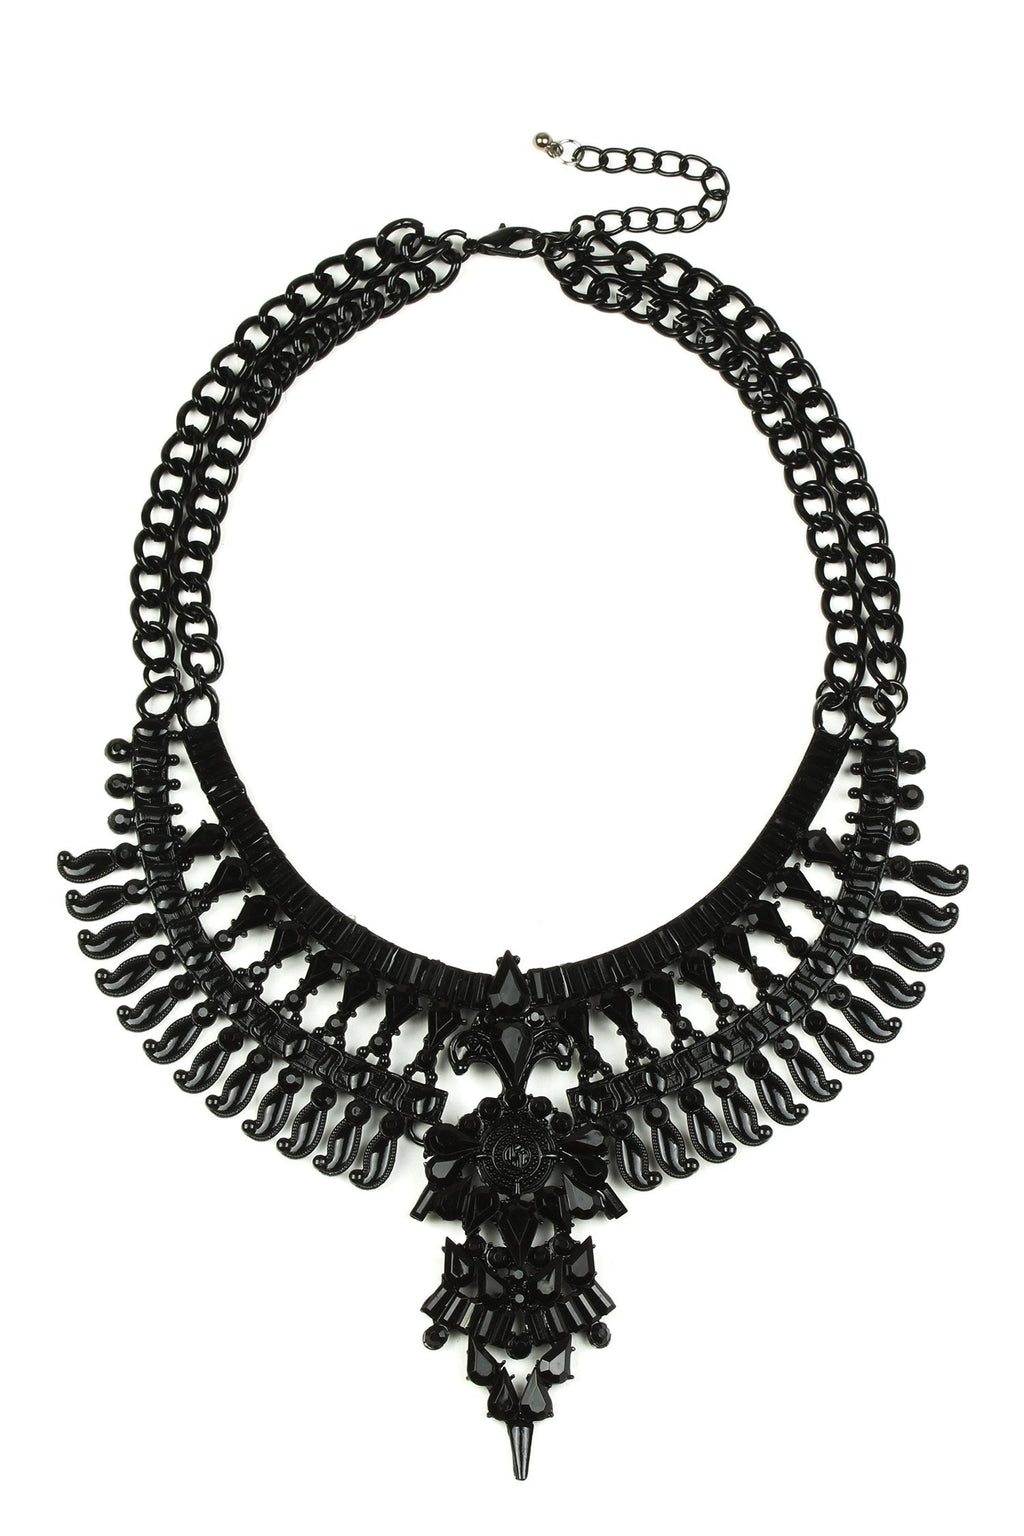 Black alloy glass crystal tribal statement necklace.